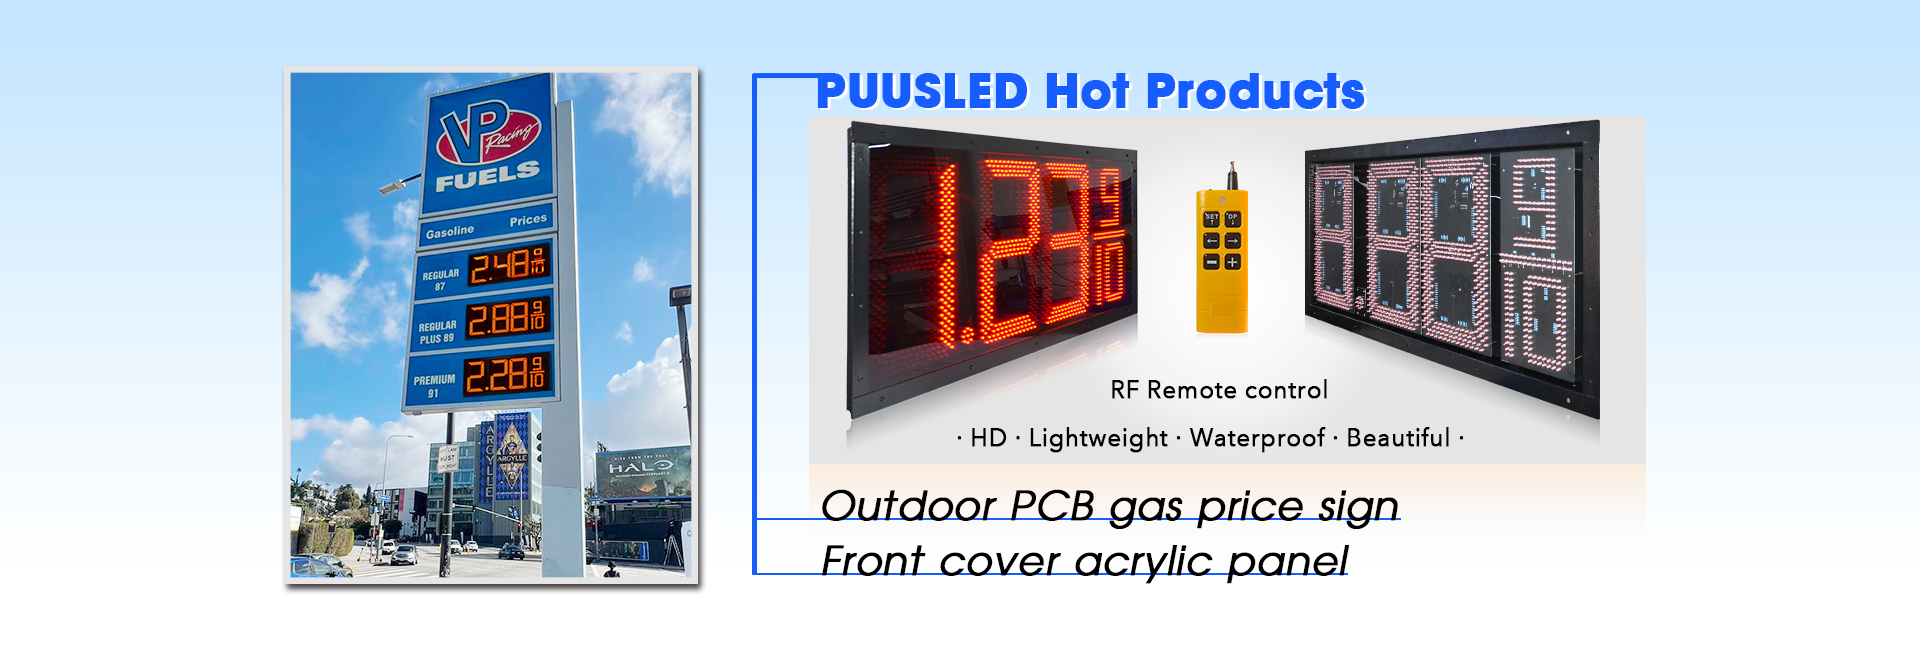 pcb gas price sign